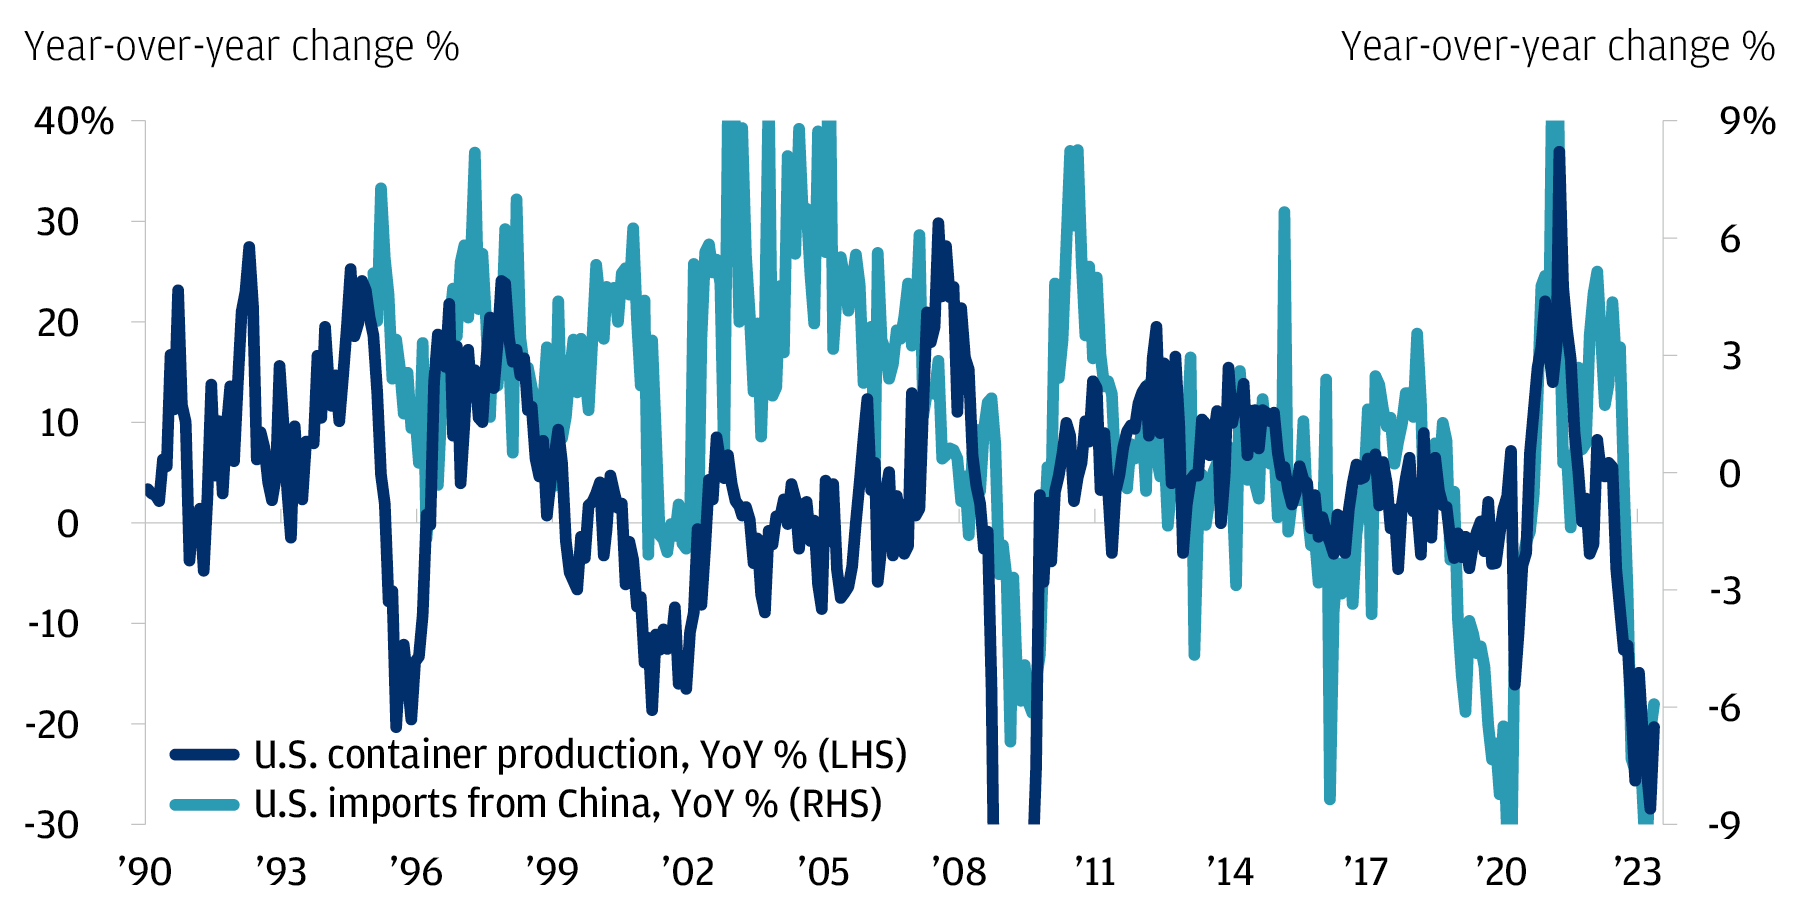 The chart describes the relationship between the U.S. container production (year over year % change) and the U.S. imports from China (year over year % change).